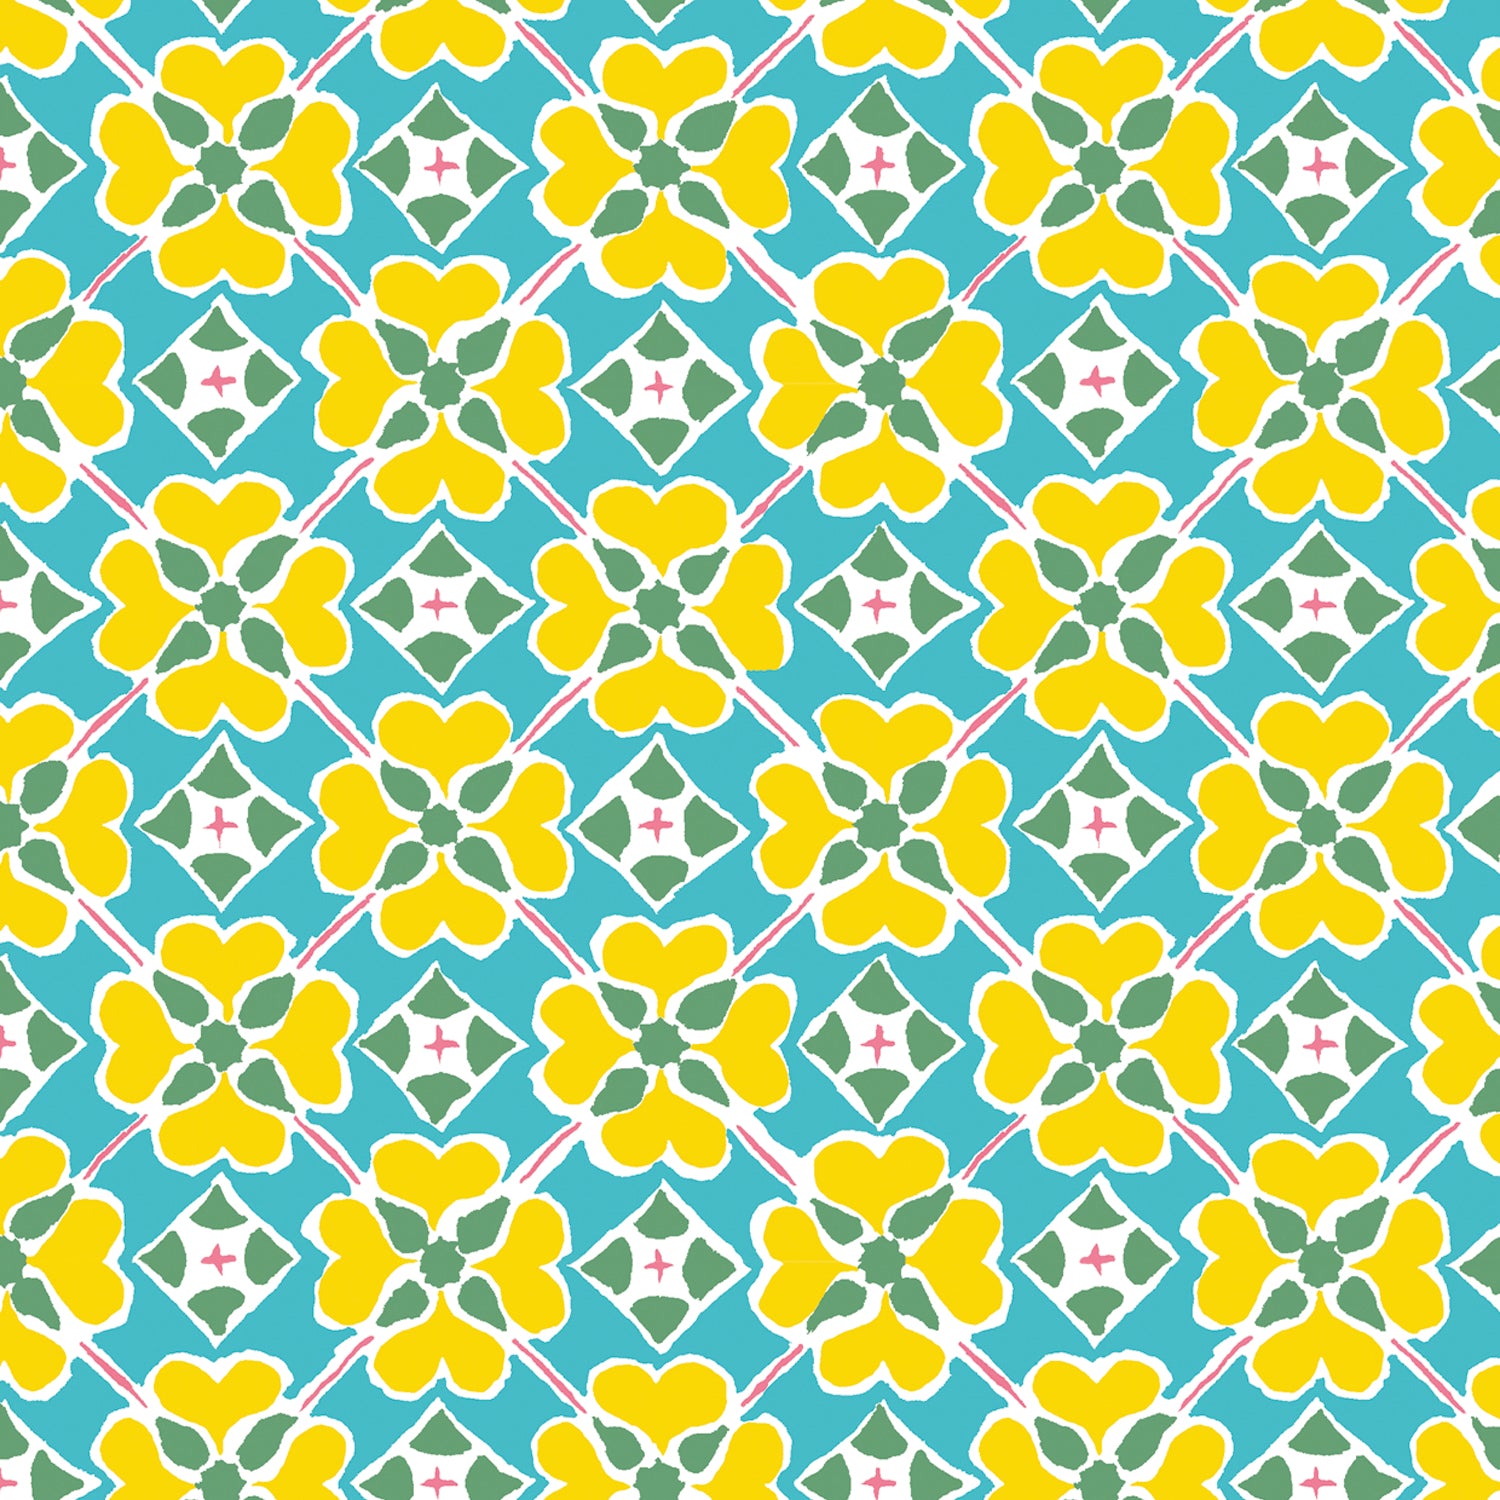 Detail of wallpaper in a floral lattice print in yellow, pink, blue and white.